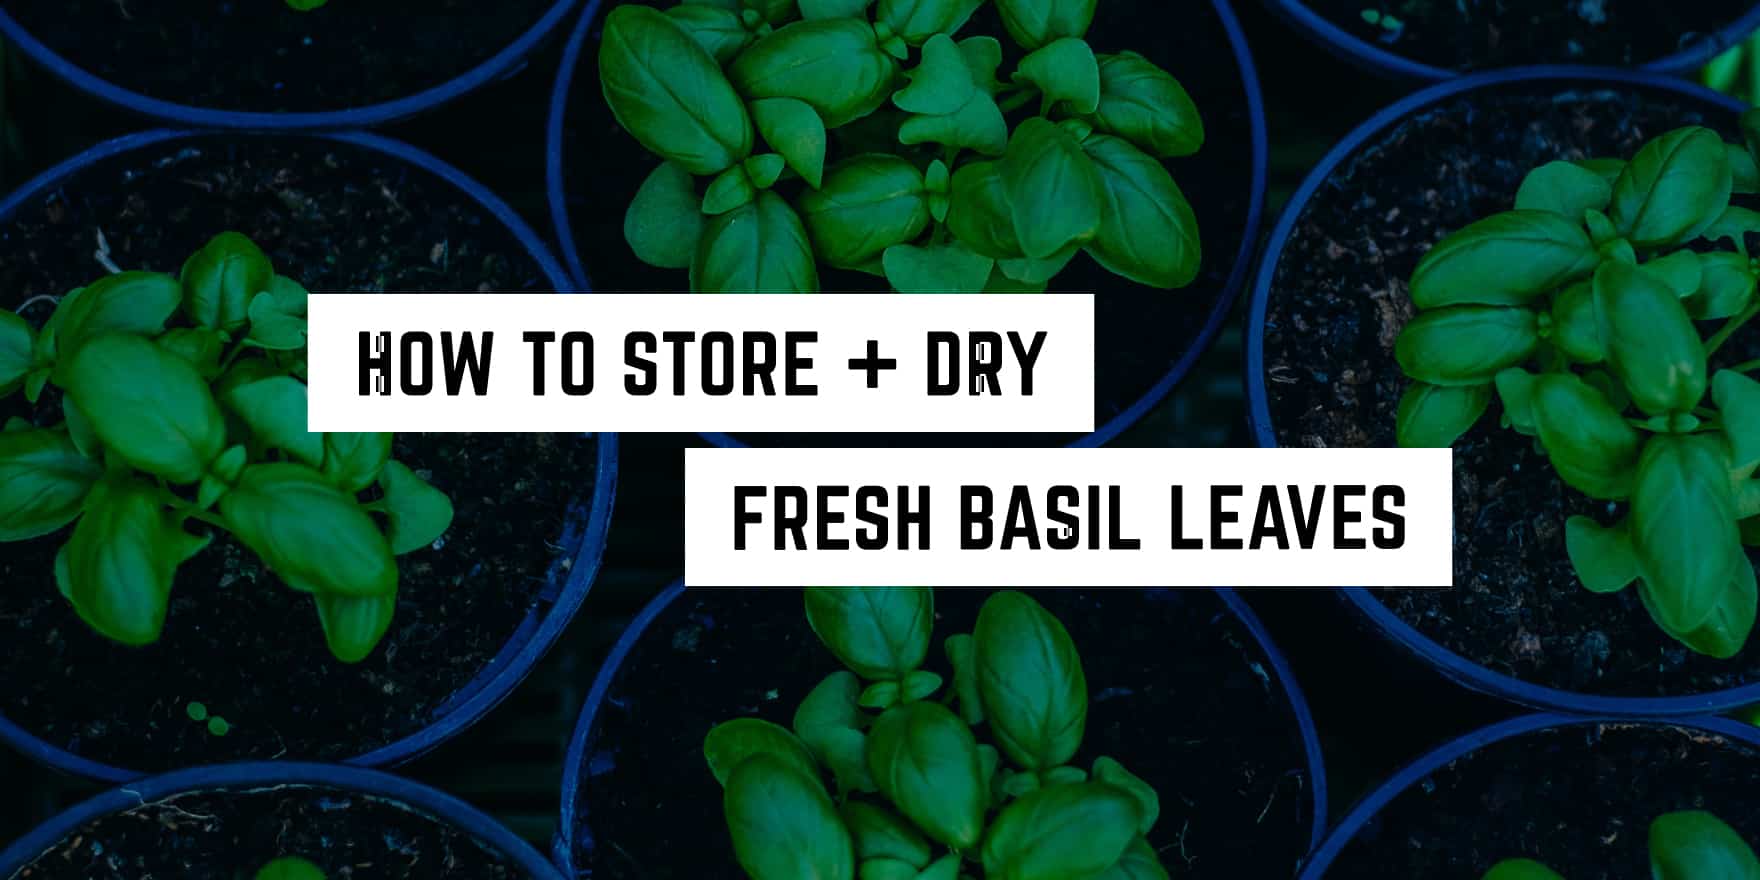 How To Store And Dry Fresh Basil Leaves Plentiful Earth,Best Portable Infrared Grill